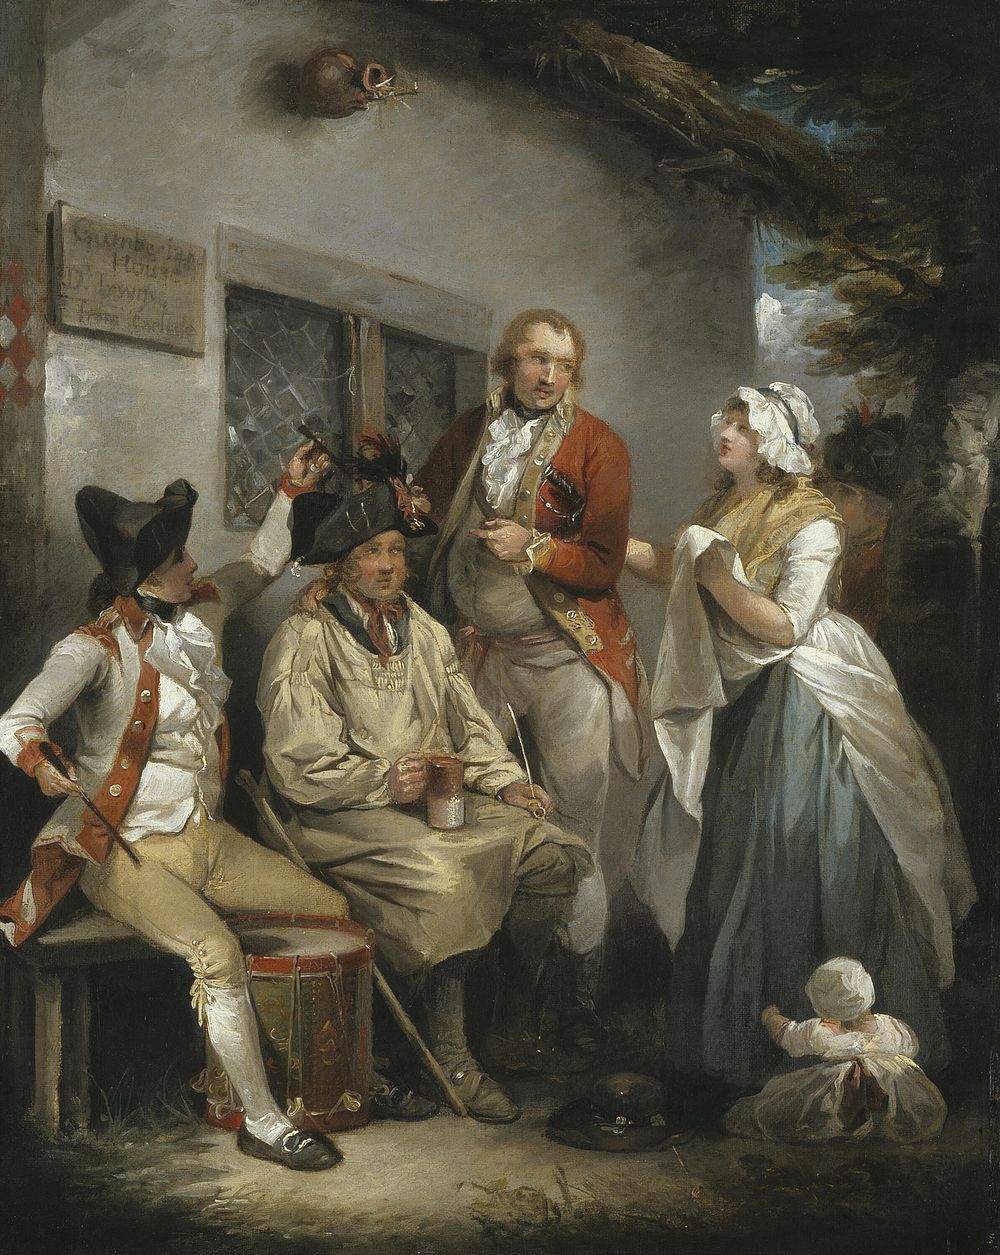 Trepanning a Recruit by George Morland